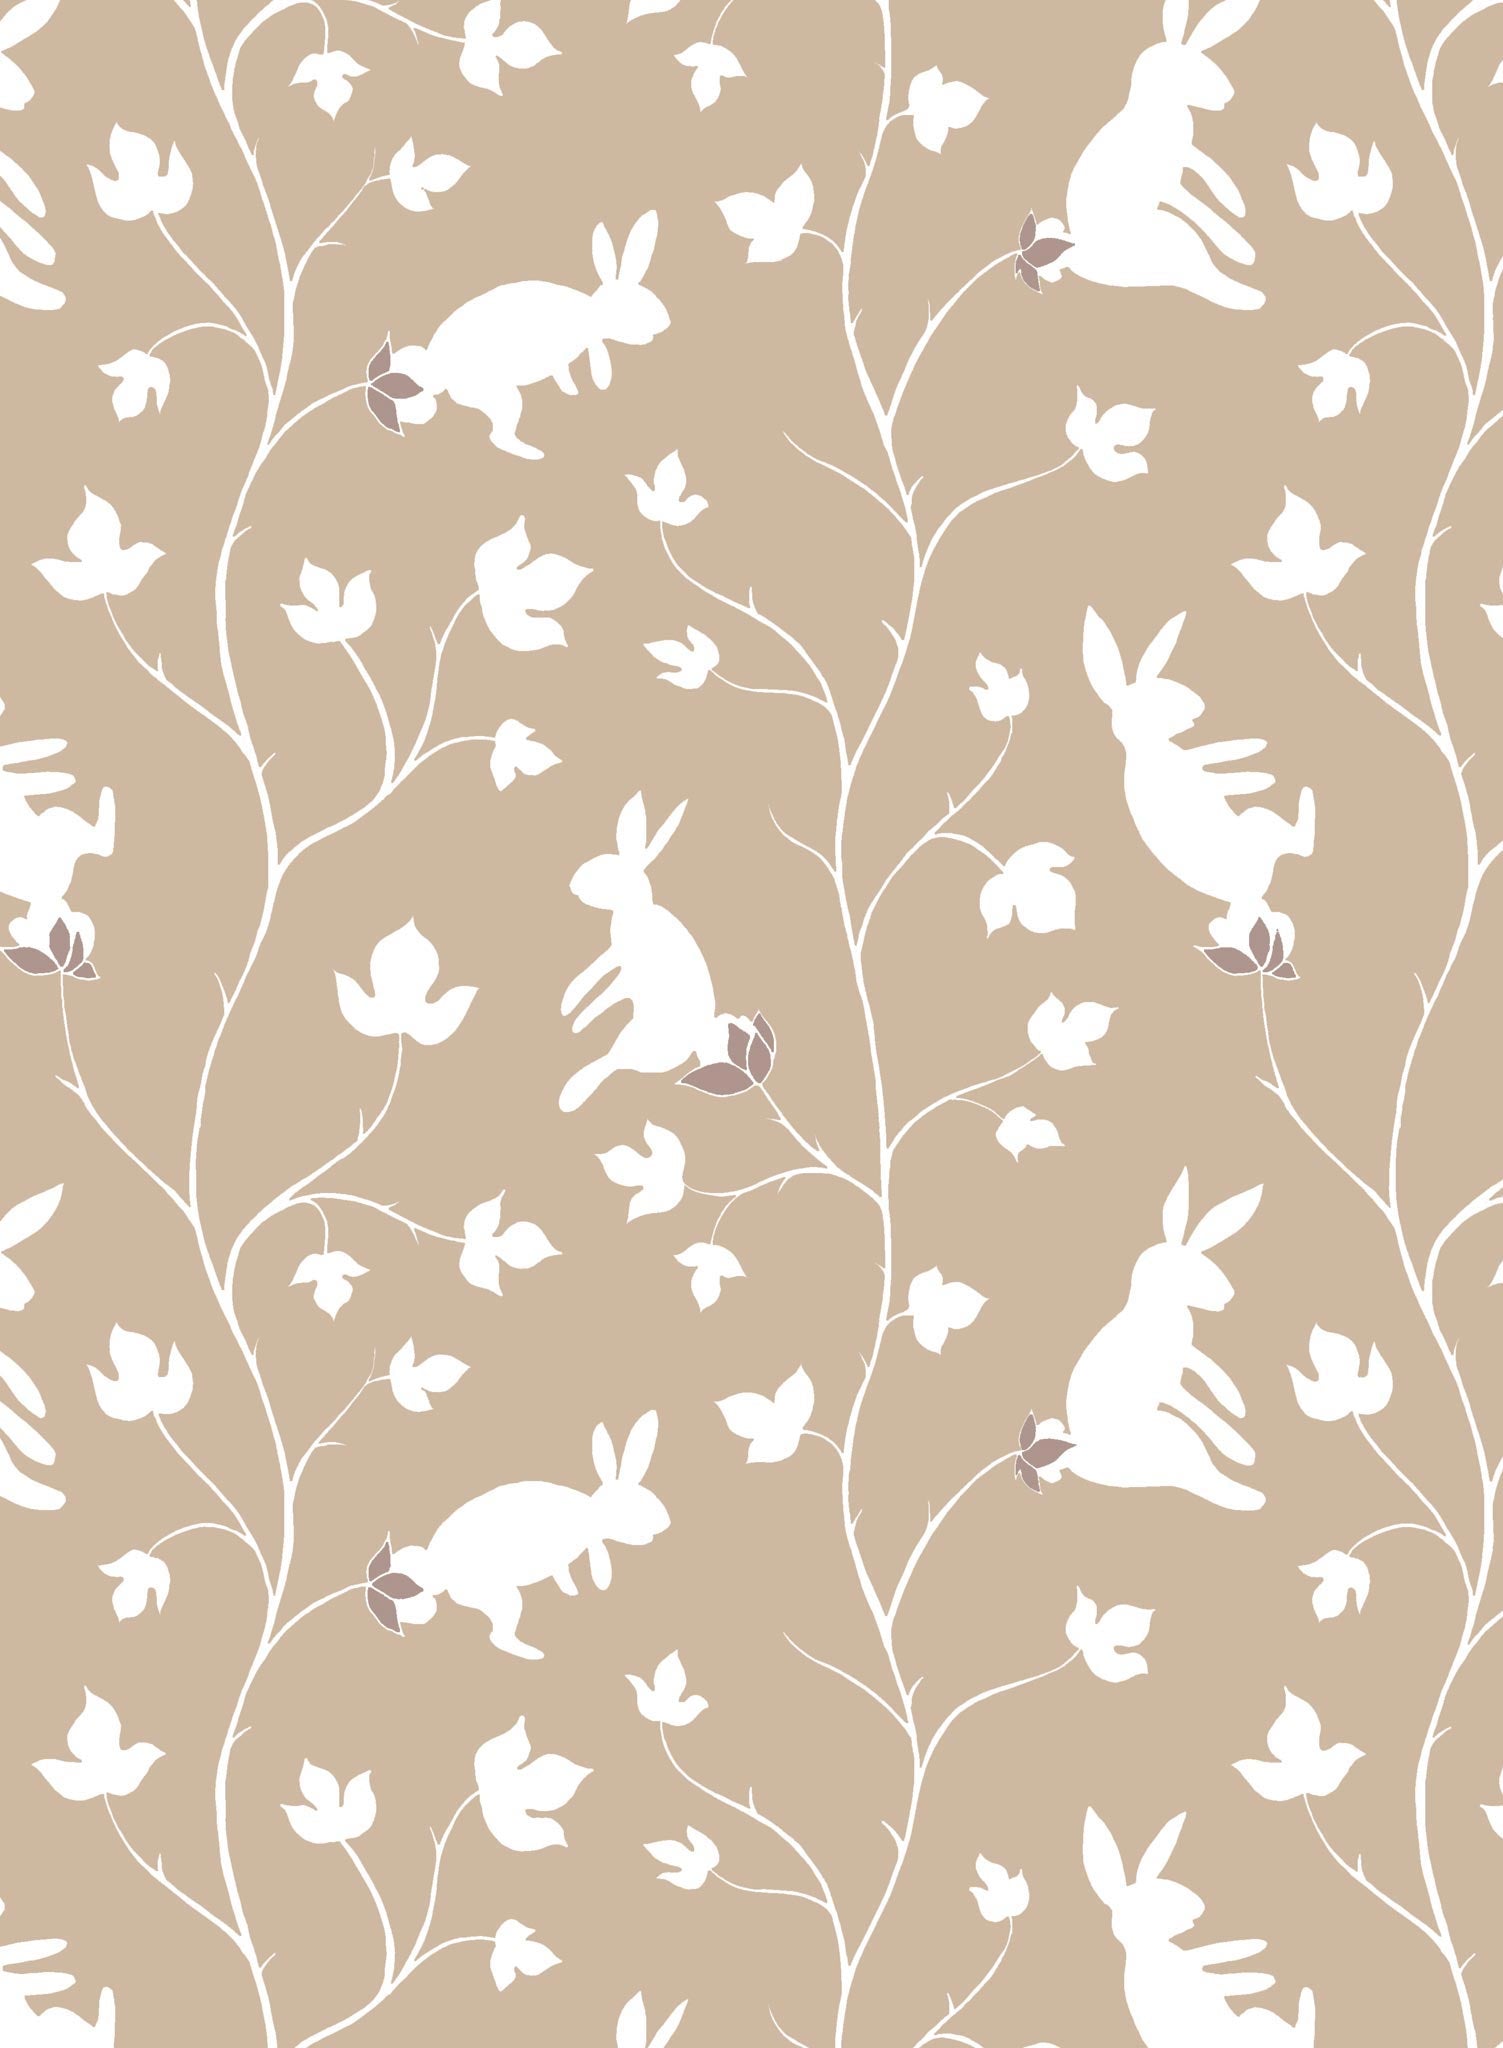 Bunny Tree is a minimalist wallpaper by Opposite Wall of rabbits growing in trees.